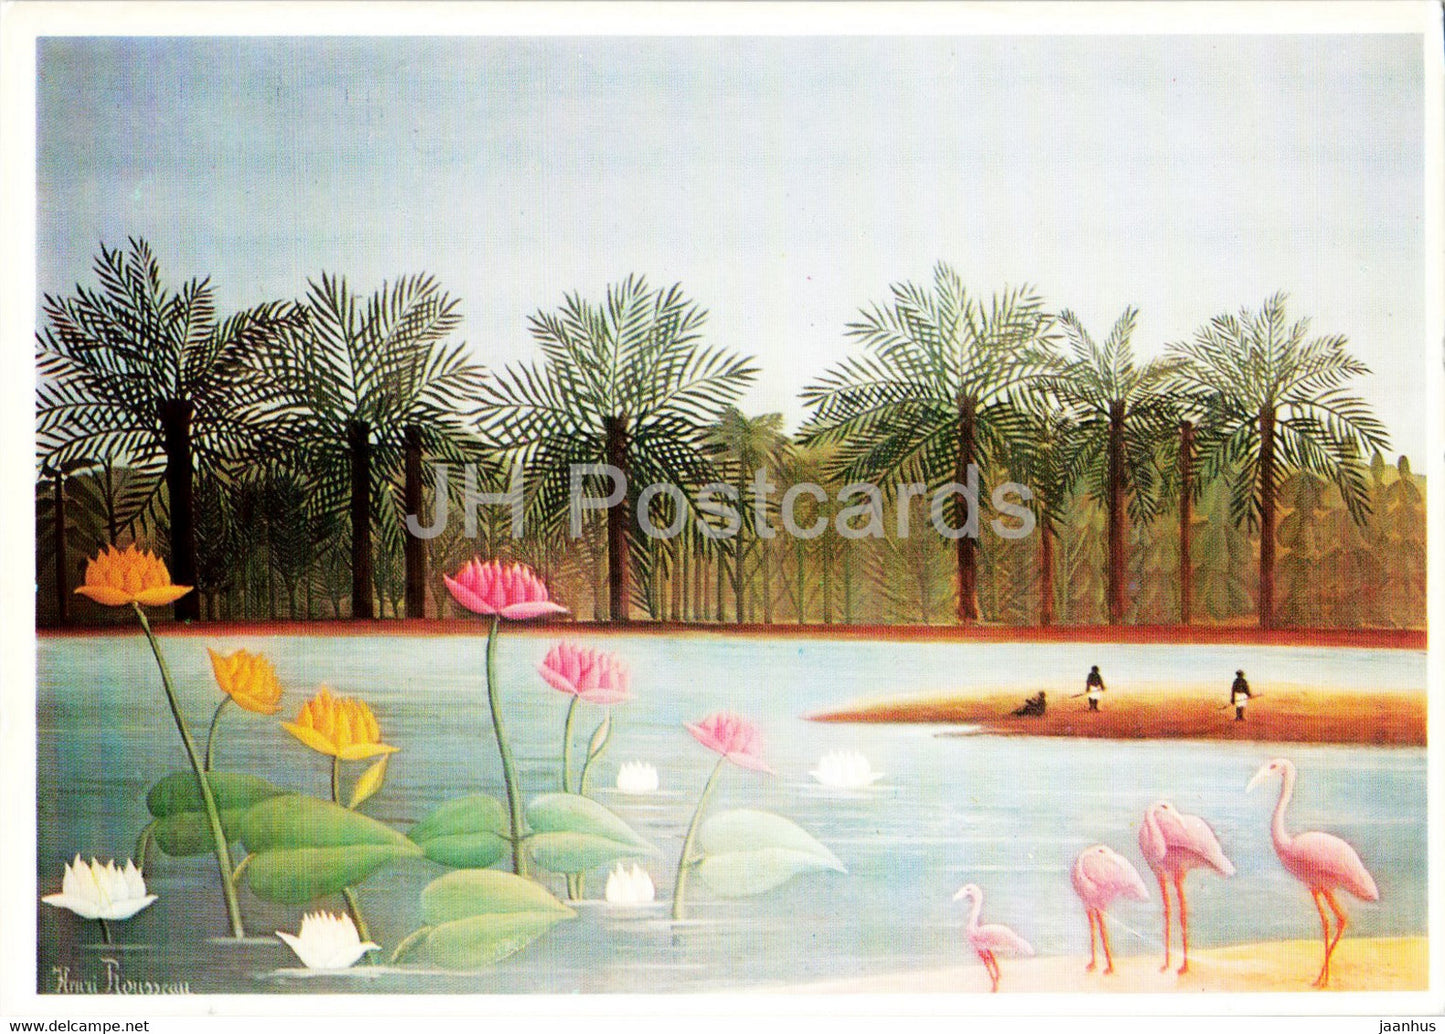 painting by Henri Rousseau - Les Flamants - Flamingoes - birds - French art - France - unused - JH Postcards